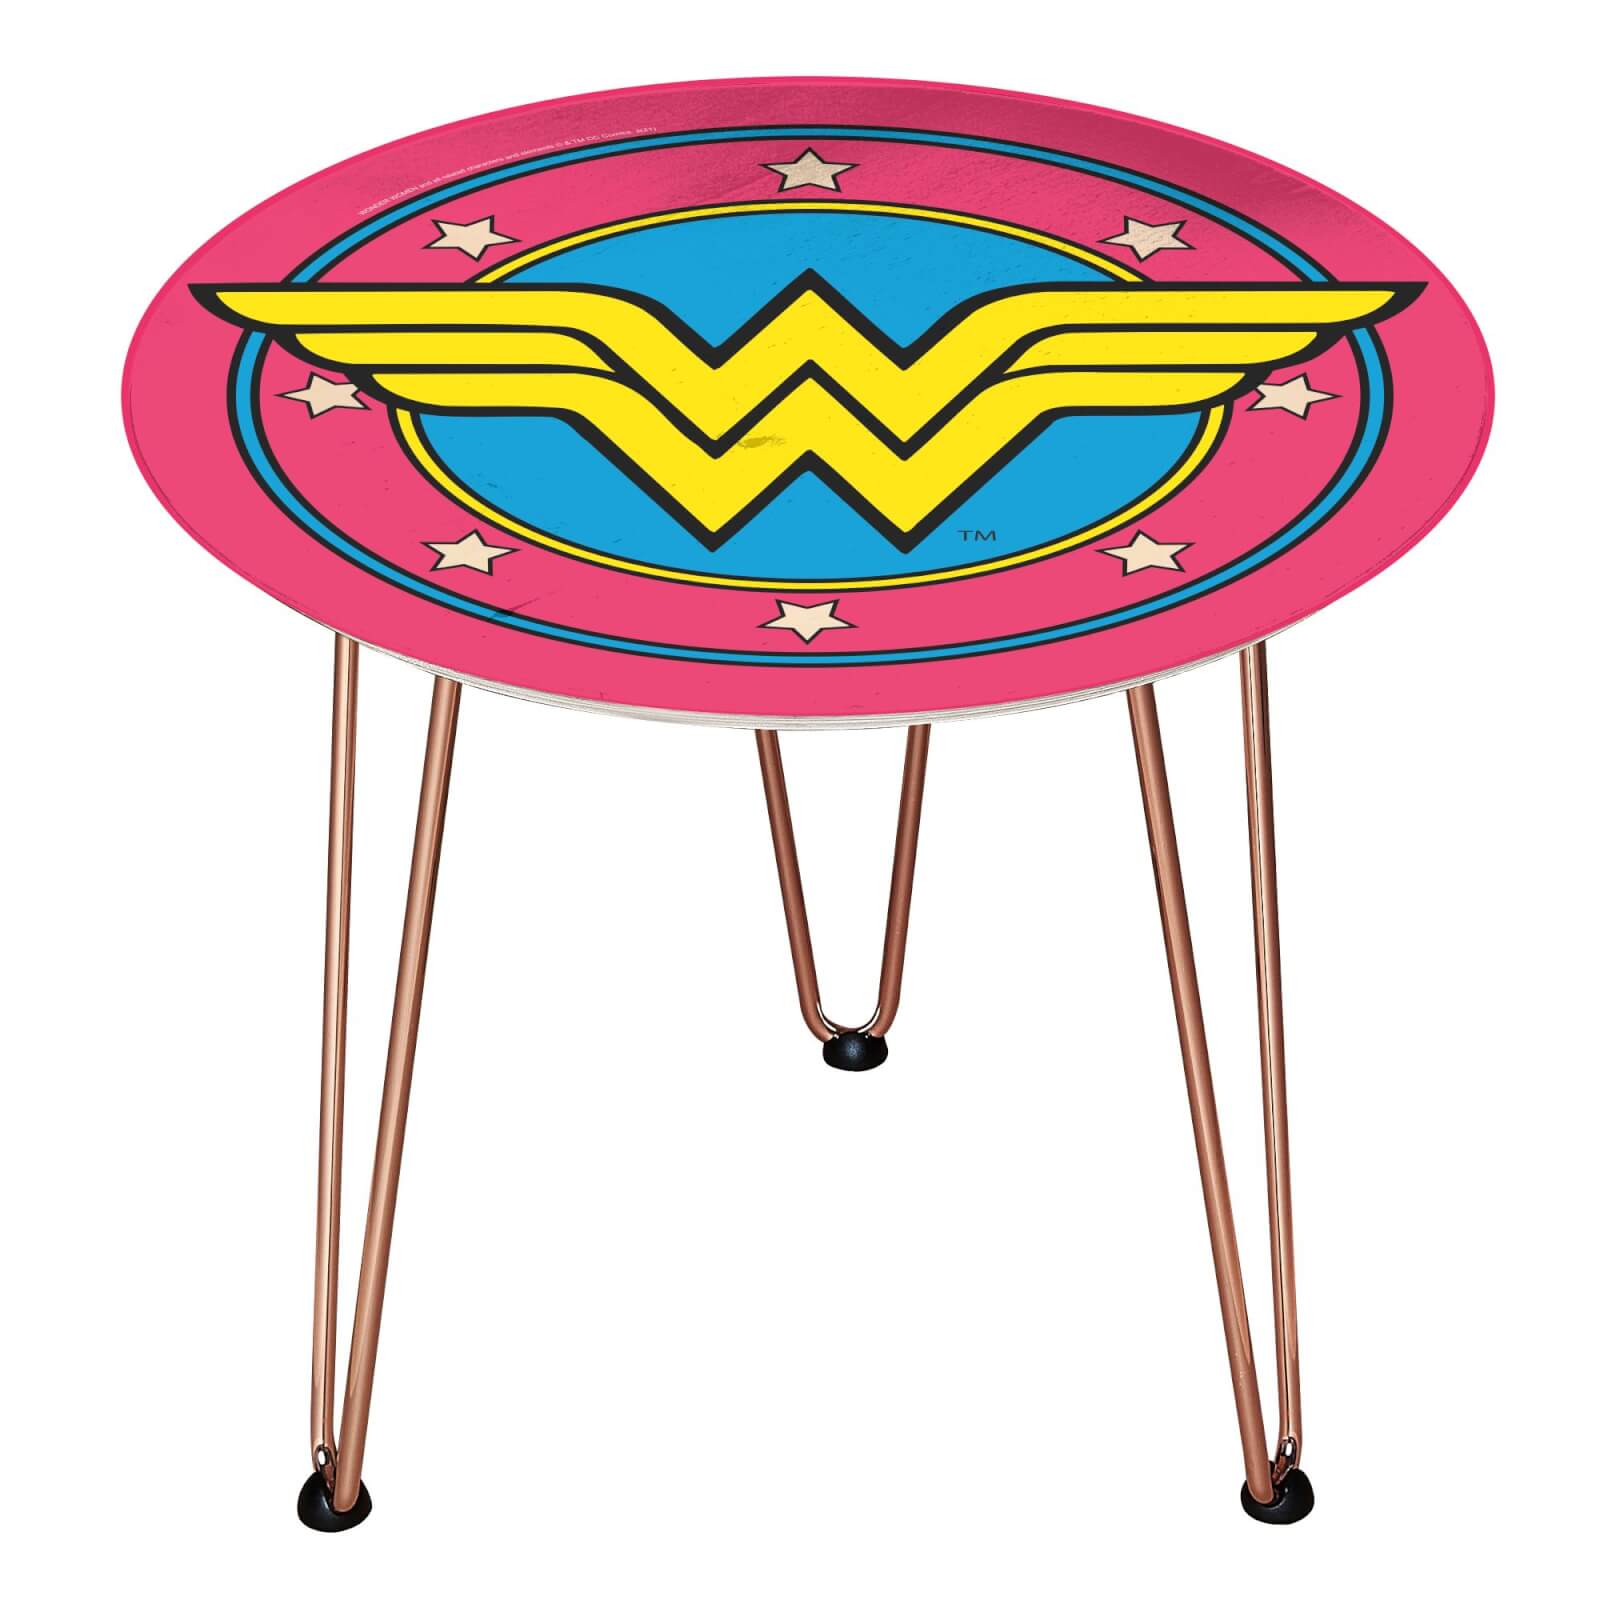 Decorsome DC Wonder Woman Wooden Side Table - Rose gold